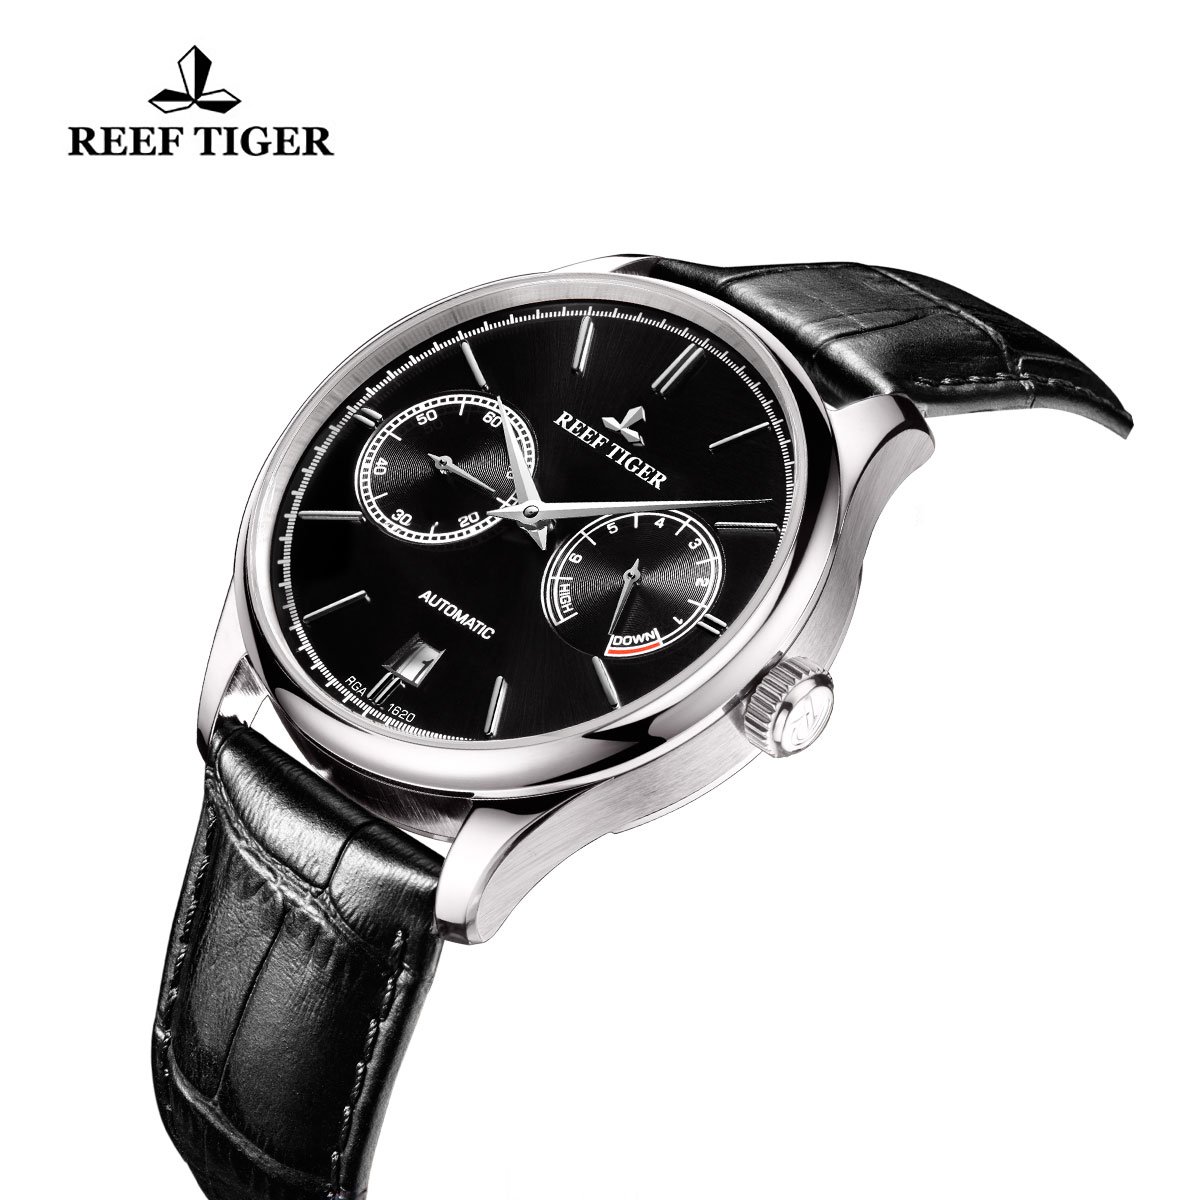 REEF TIGER Casual Mens Watches Date Power Reserve Steel Case Automatic Watches Leather Strap RGA1620